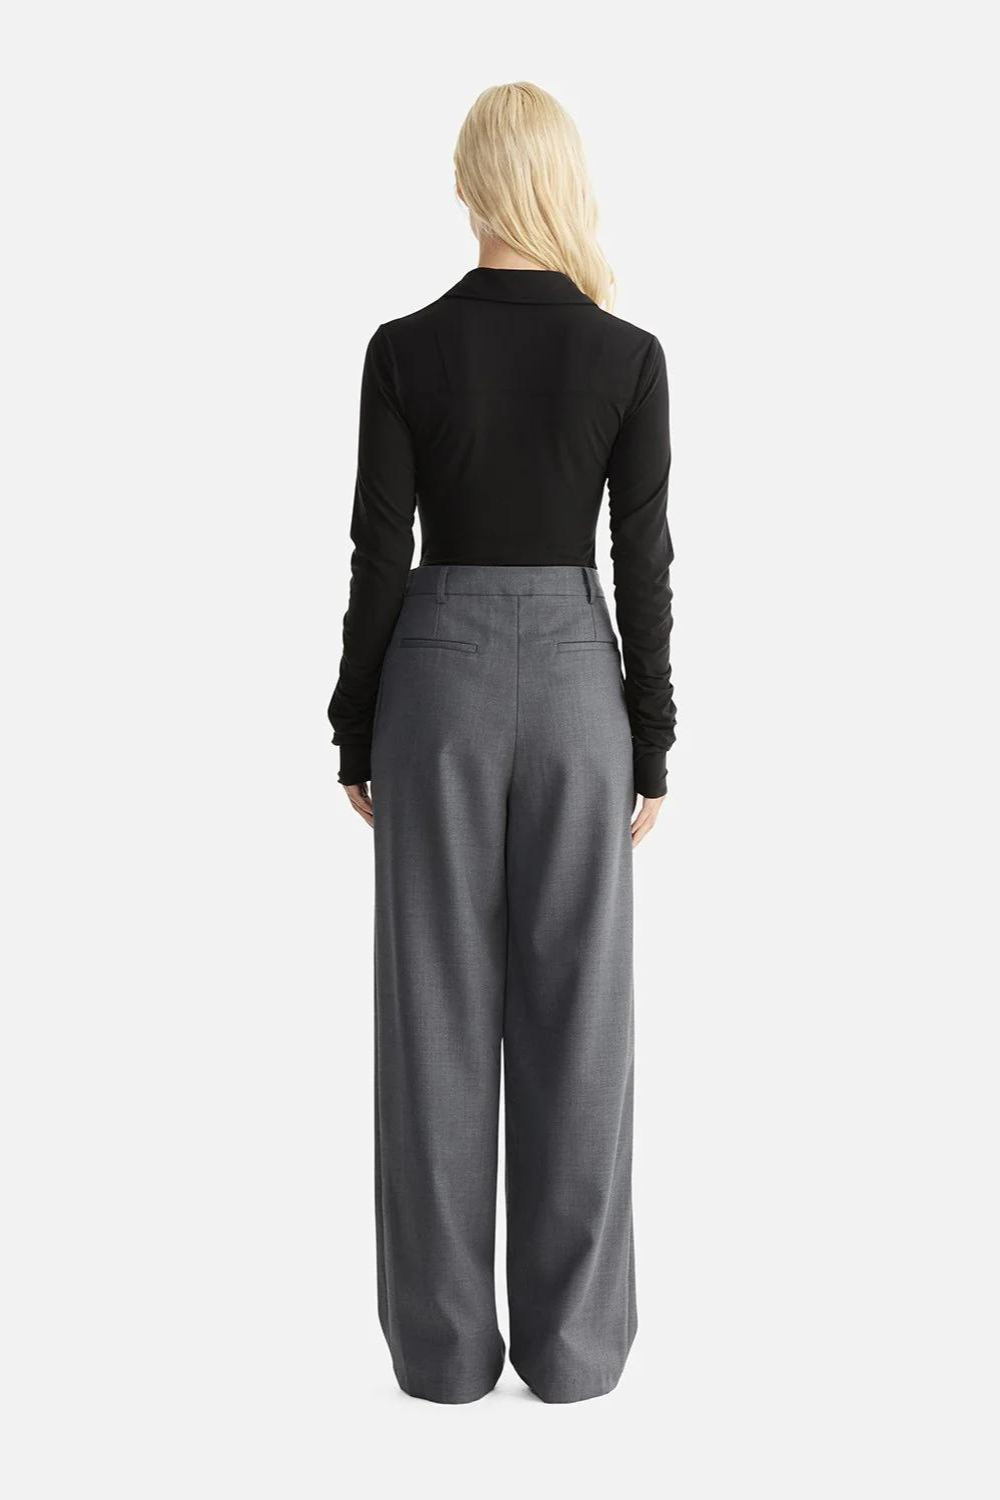 Ritchie Wide Leg Trouser | Charcoal